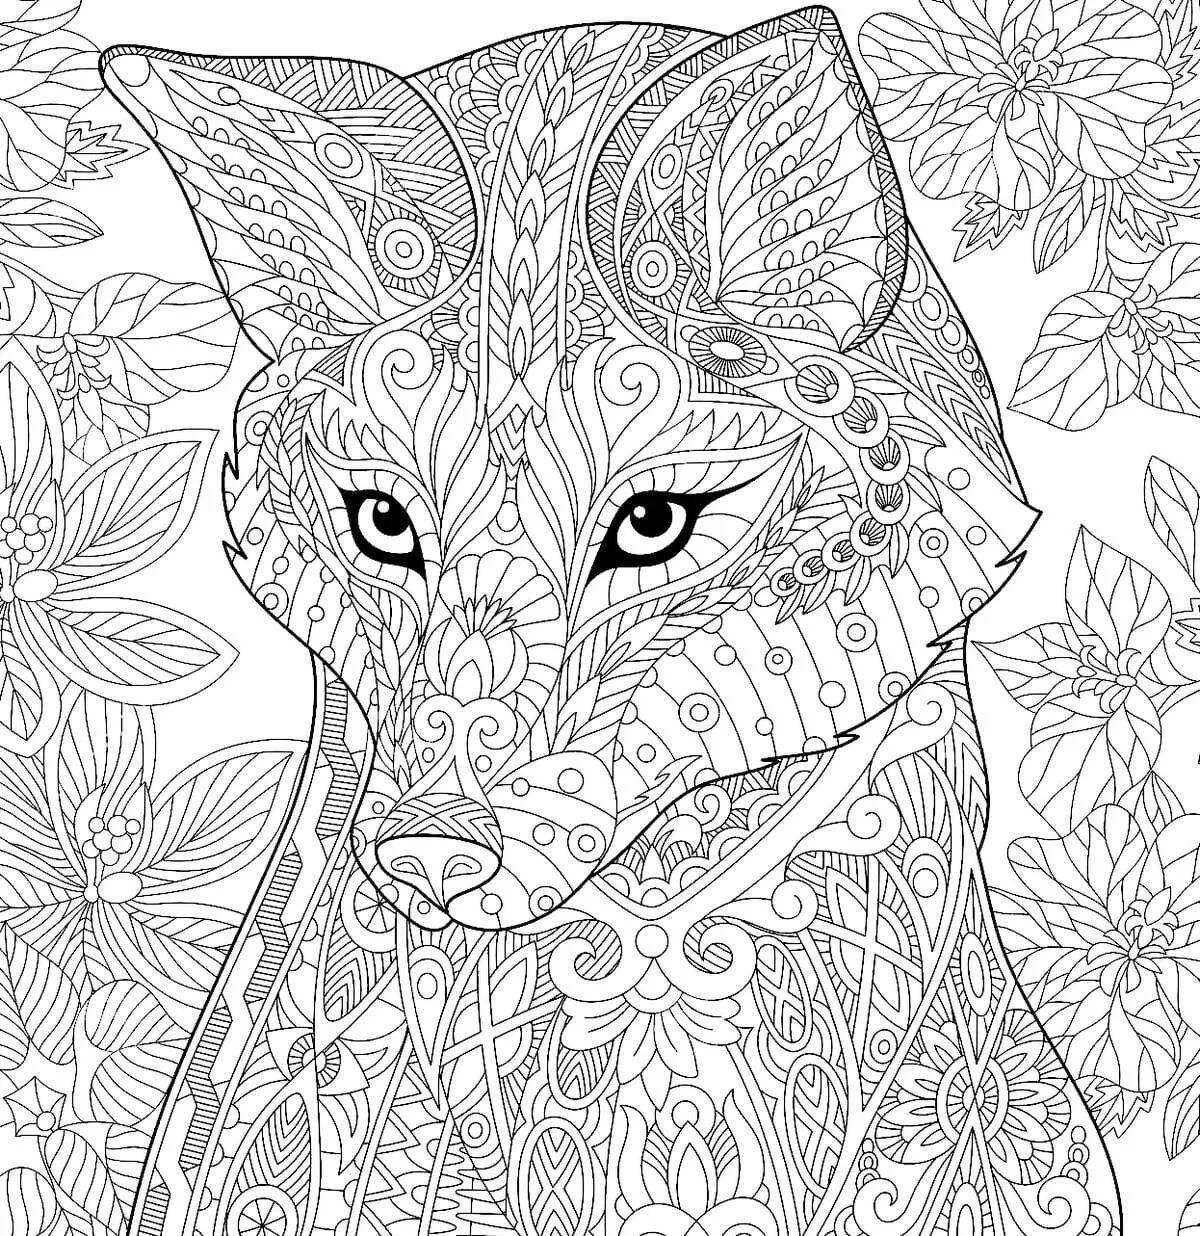 Glitter coloring book for girls 12 years old animal complex